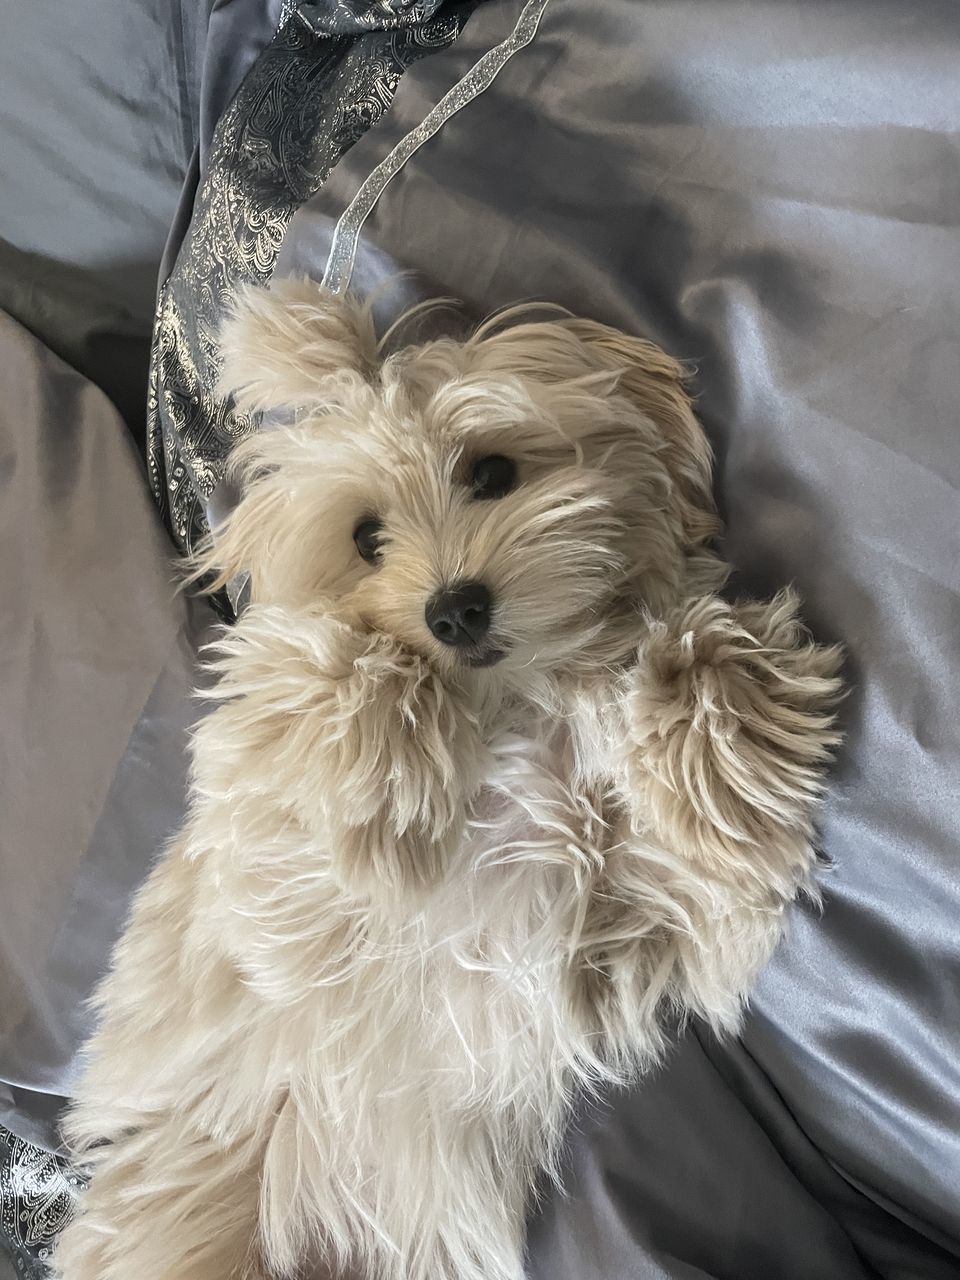 dog, pet, canine, domestic animals, animal themes, one animal, animal, mammal, indoors, lap dog, animal hair, furniture, cute, carnivore, bed, no people, white, portrait, maltese, animal body part, high angle view